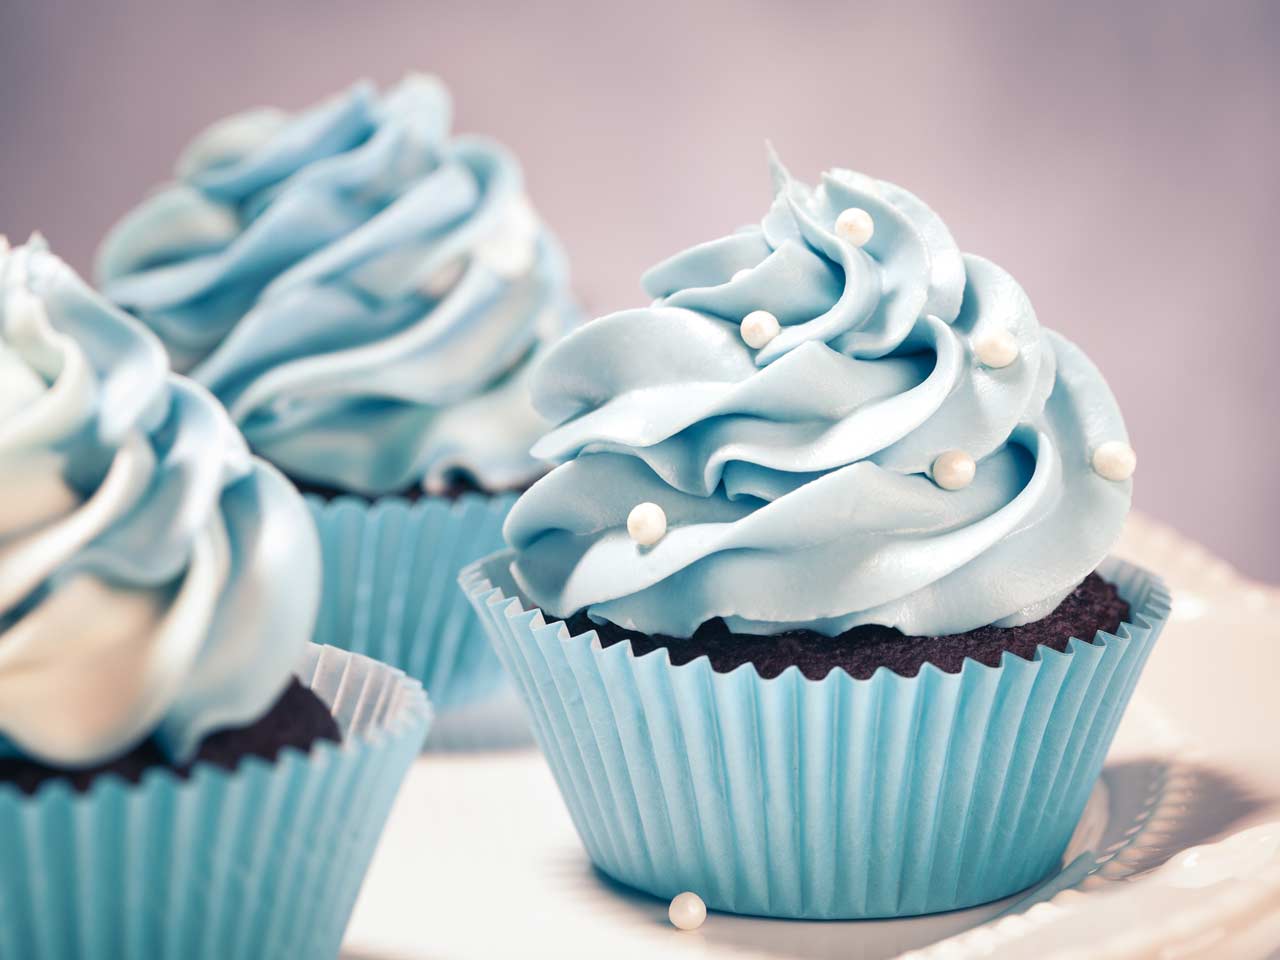 Cupcakes with buttercream icing